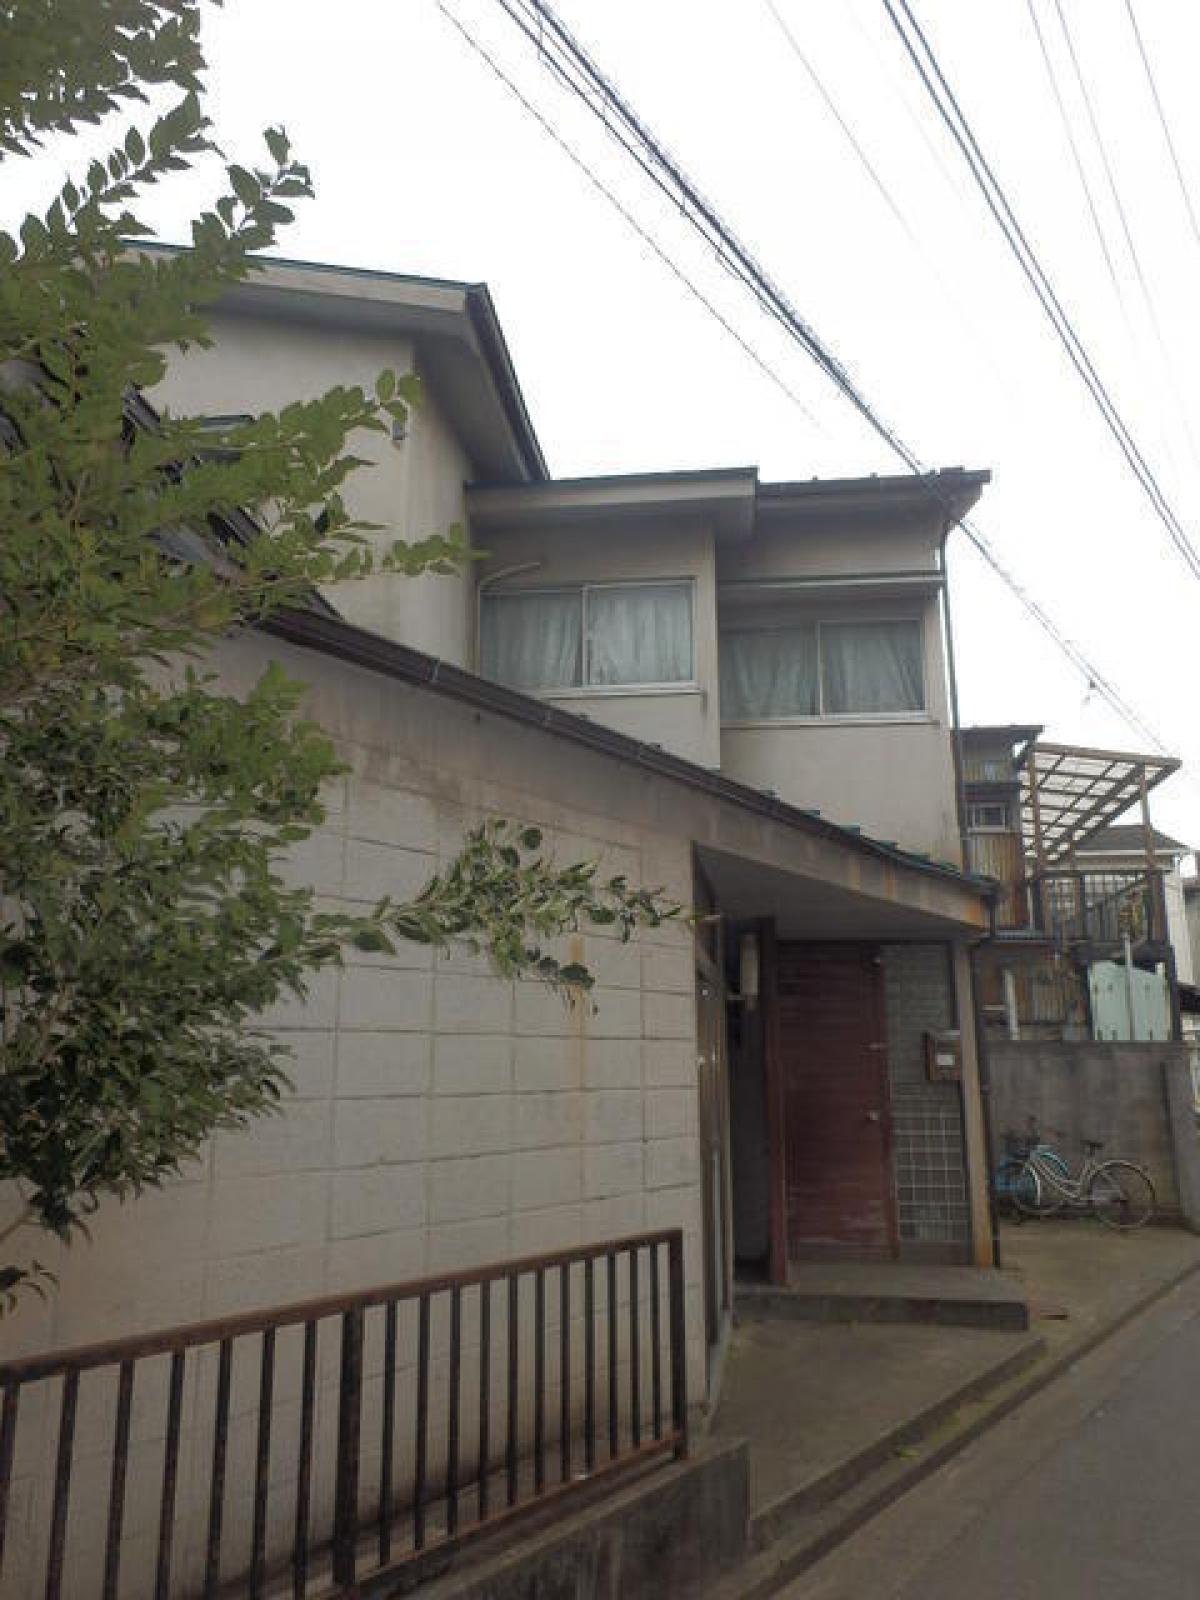 Picture of Home For Sale in Ota Ku, Tokyo, Japan